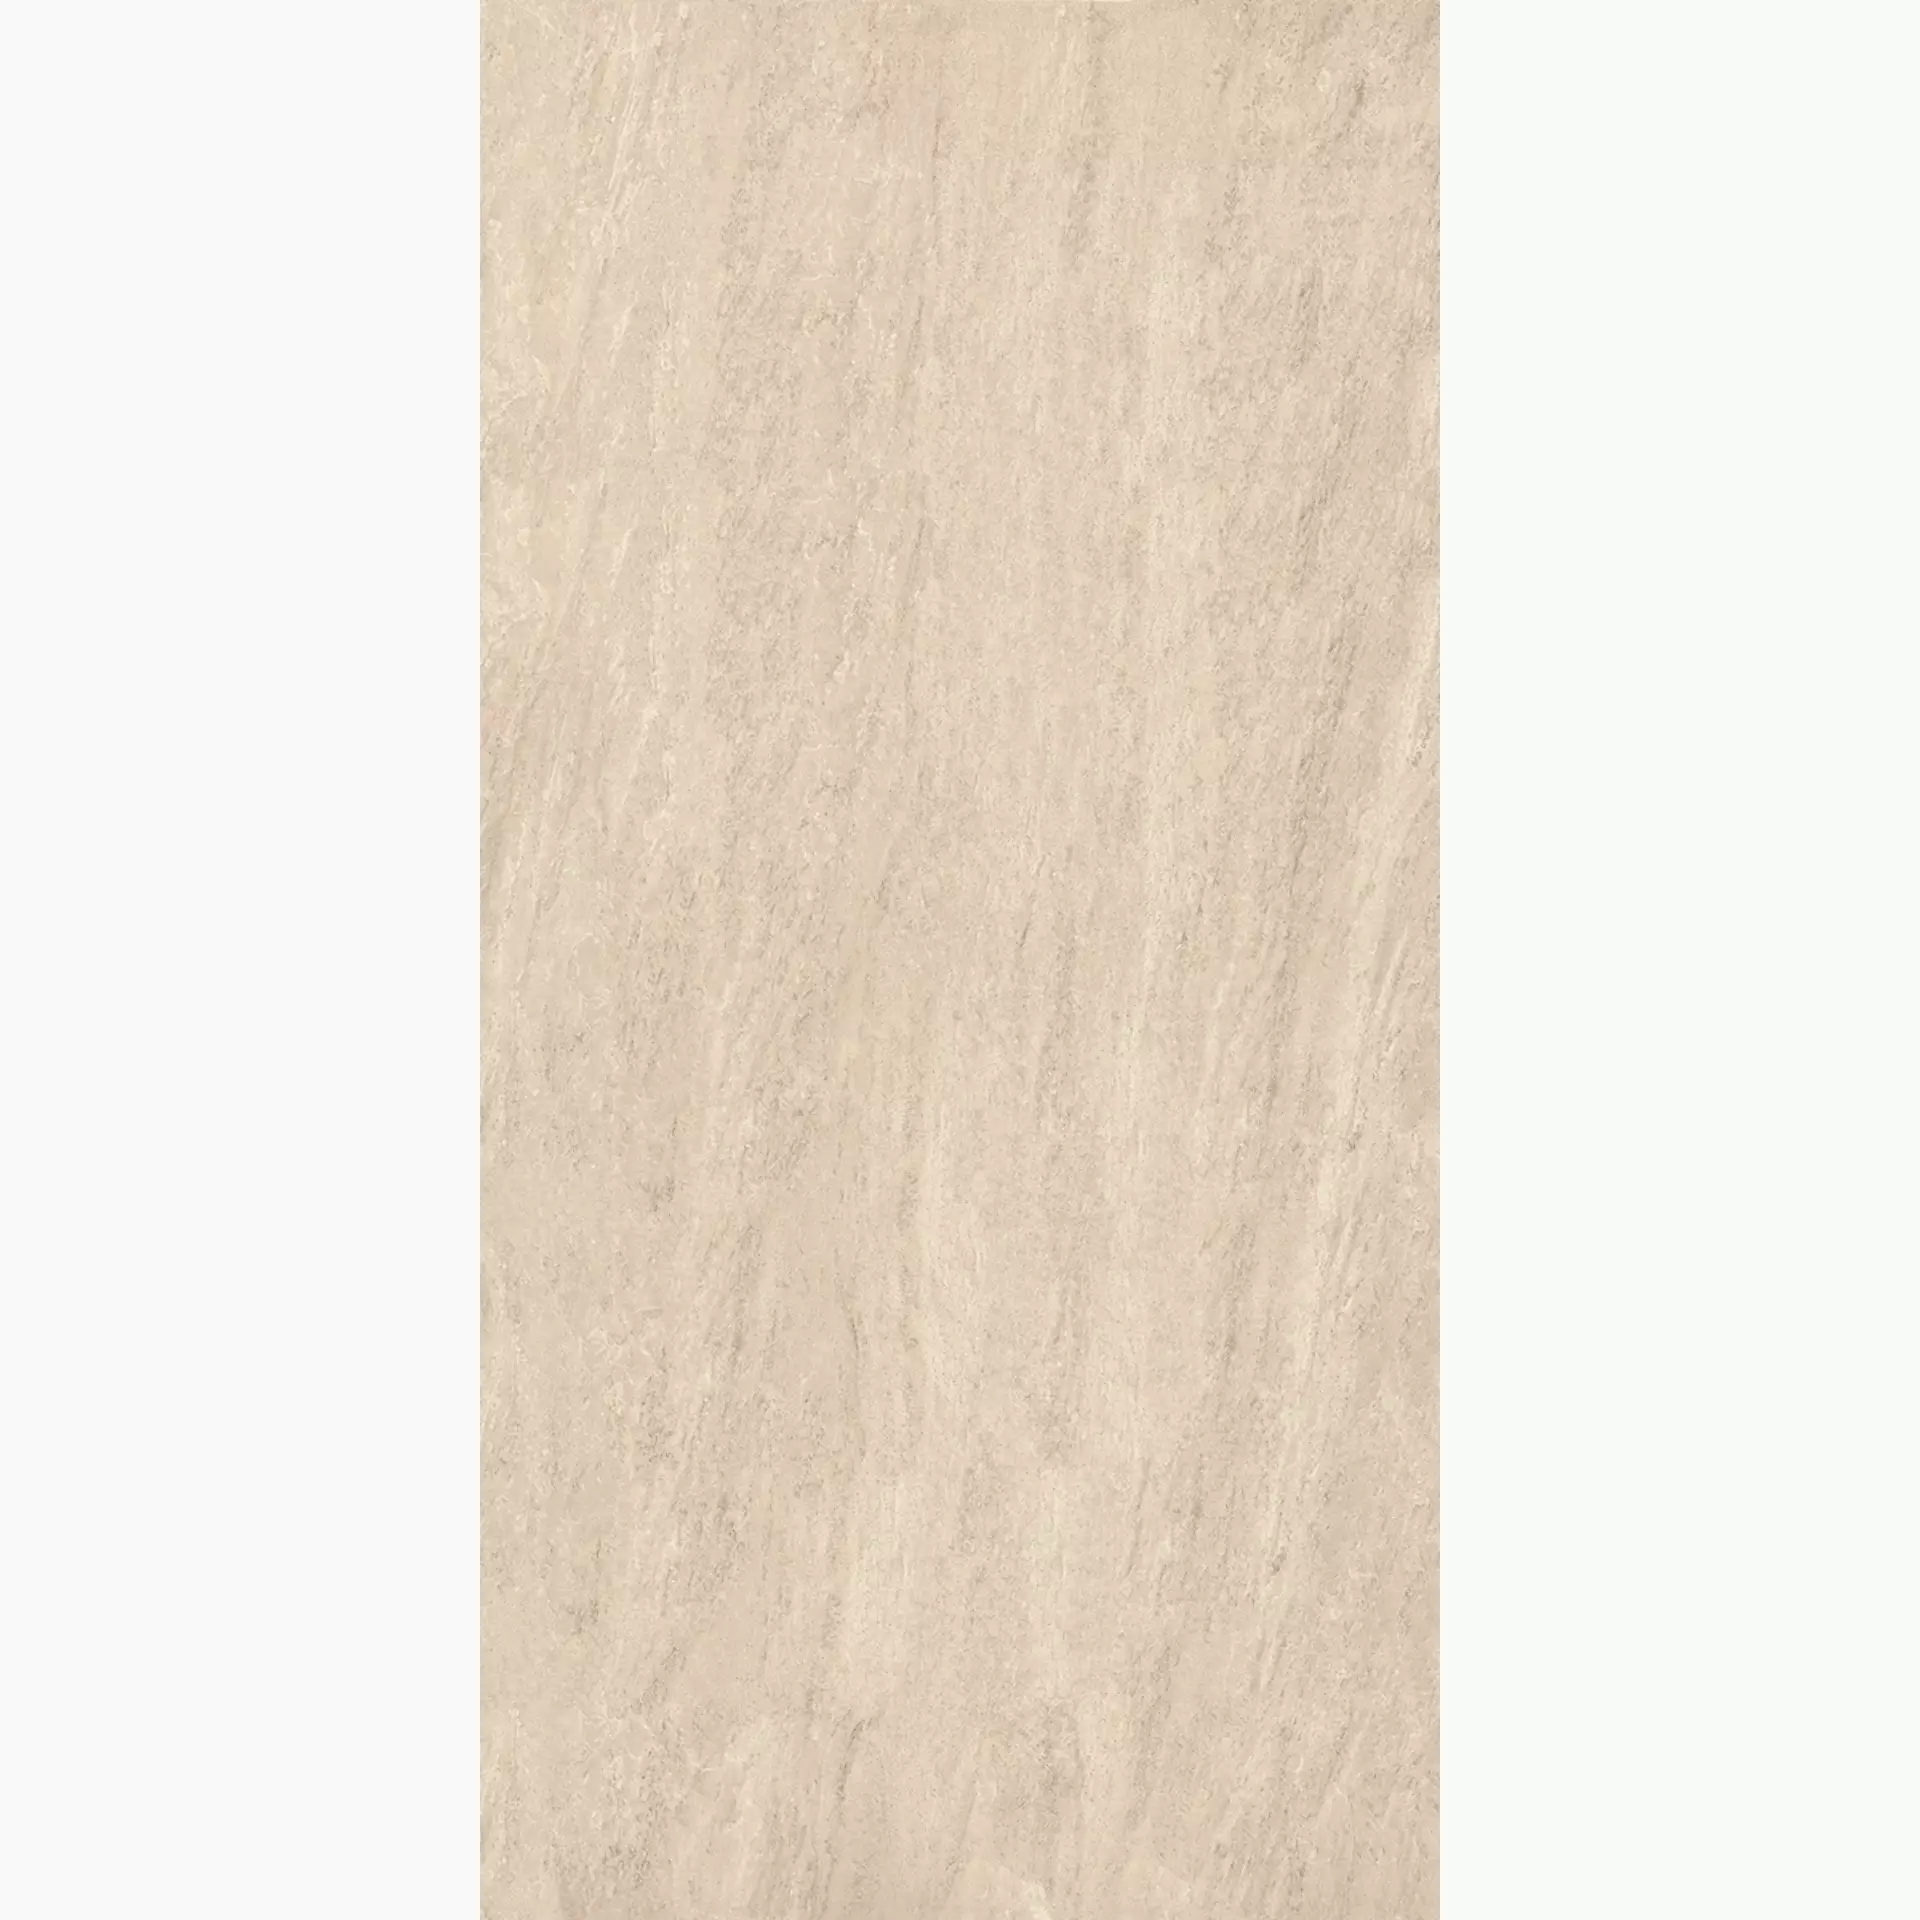 Keope Percorsi Extra Pietra Di Barge Strutturato 4A363931 60x120cm rectified 20mm